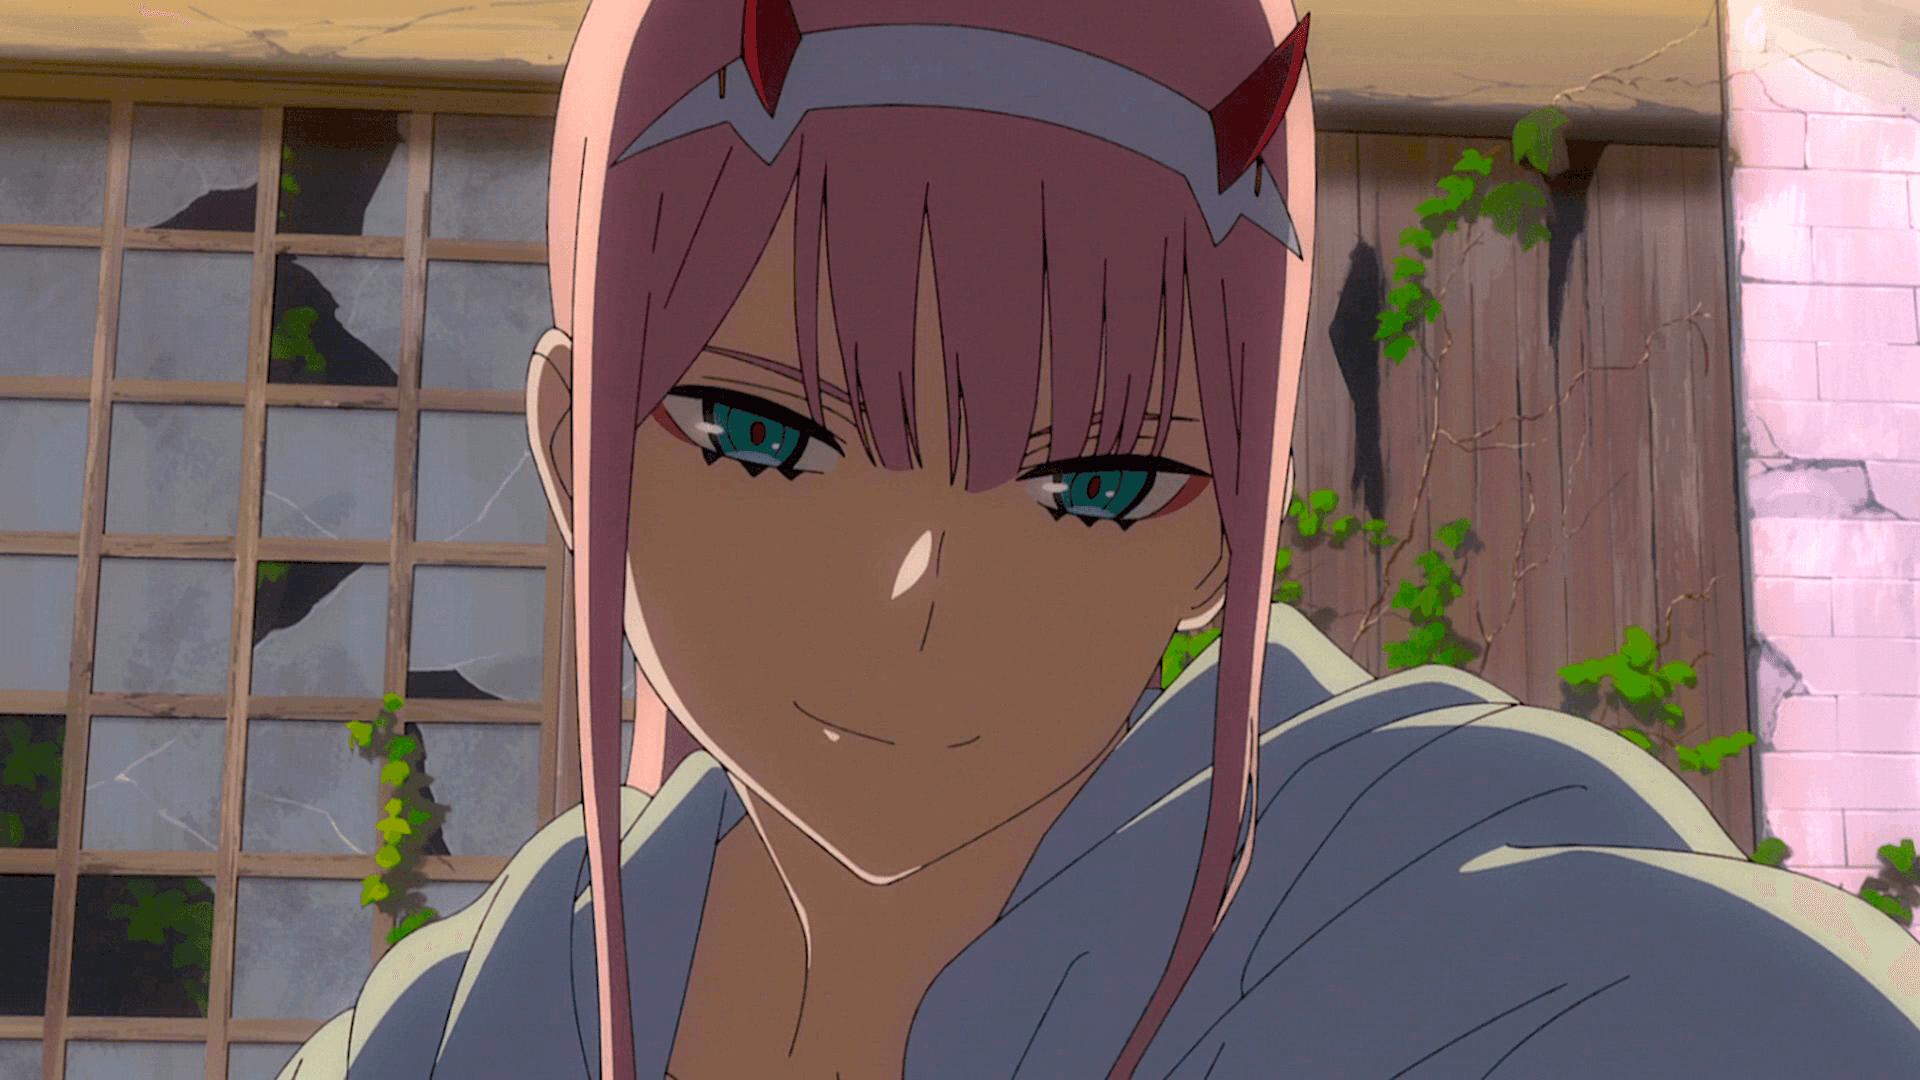 Join Zero Two for a wild and thrilling adventure!